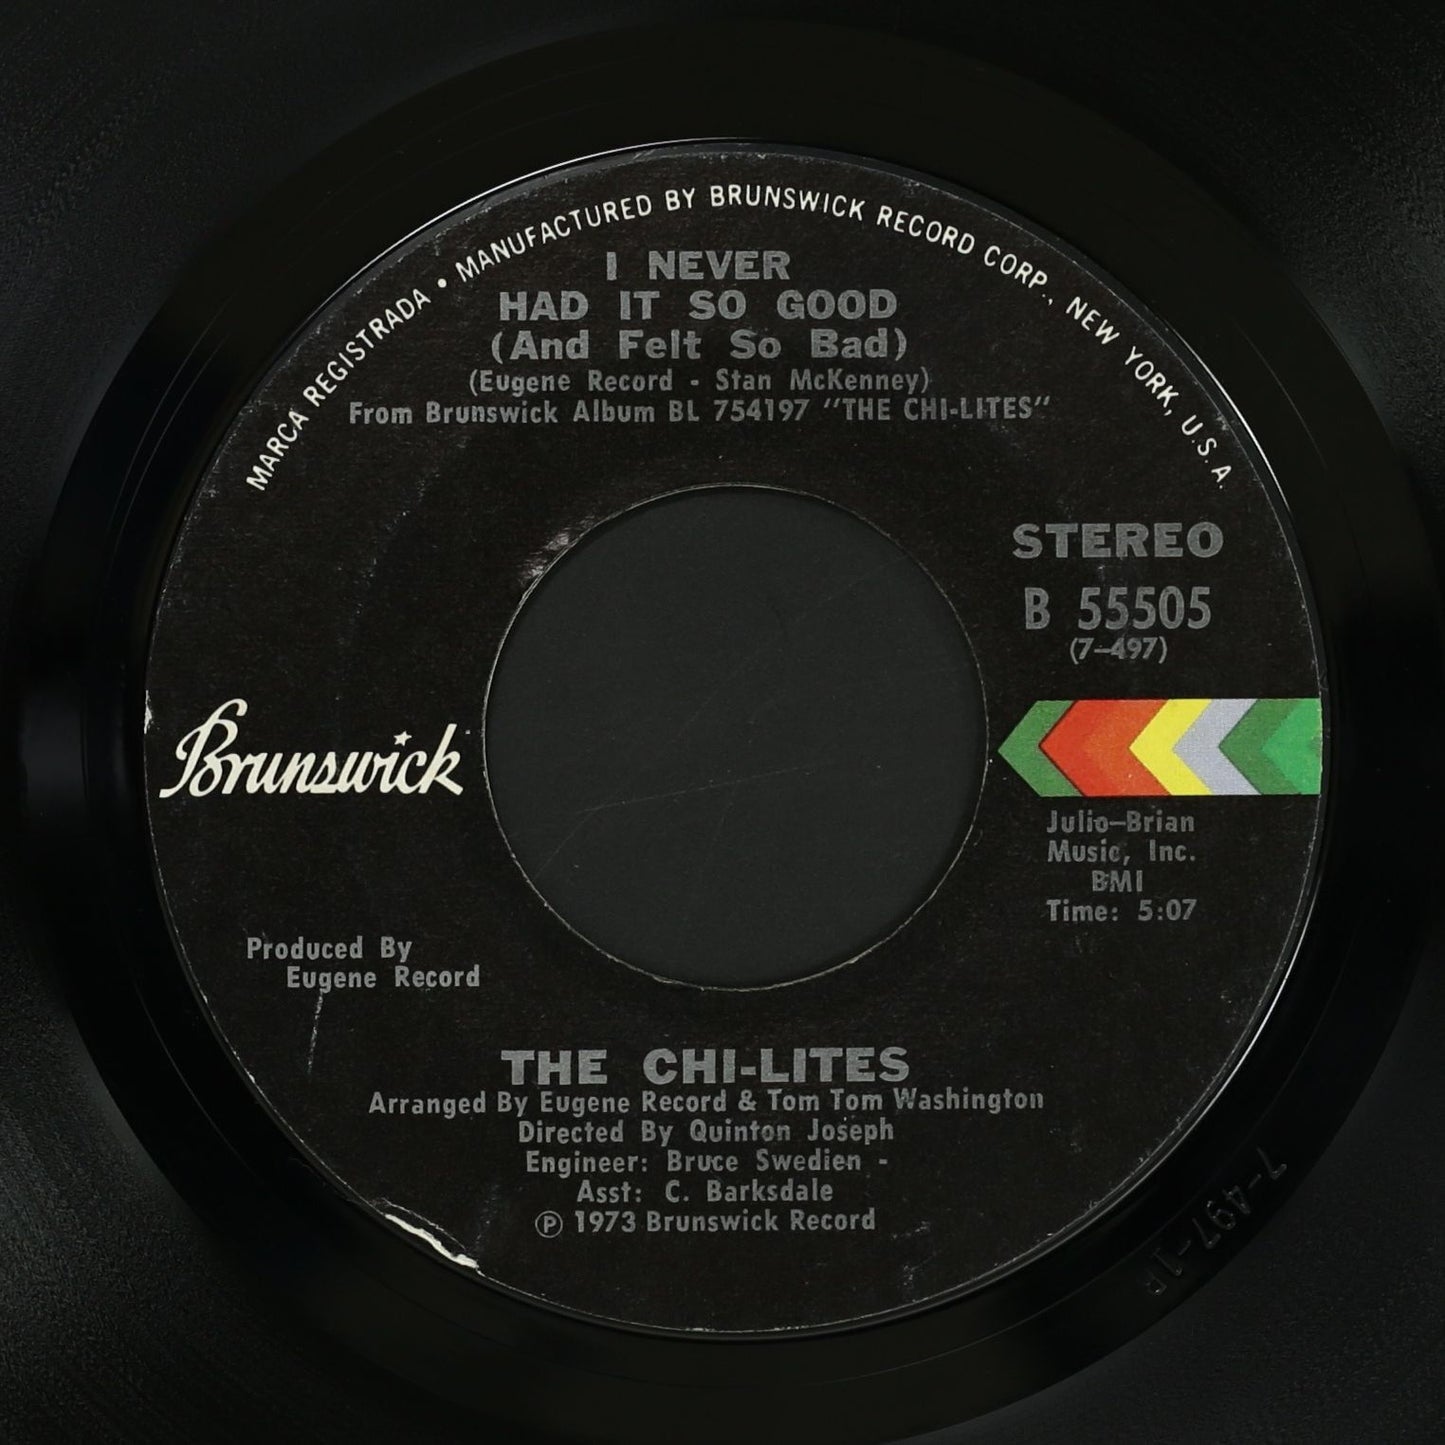 THE CHI-LITES / HOMELY GIRL